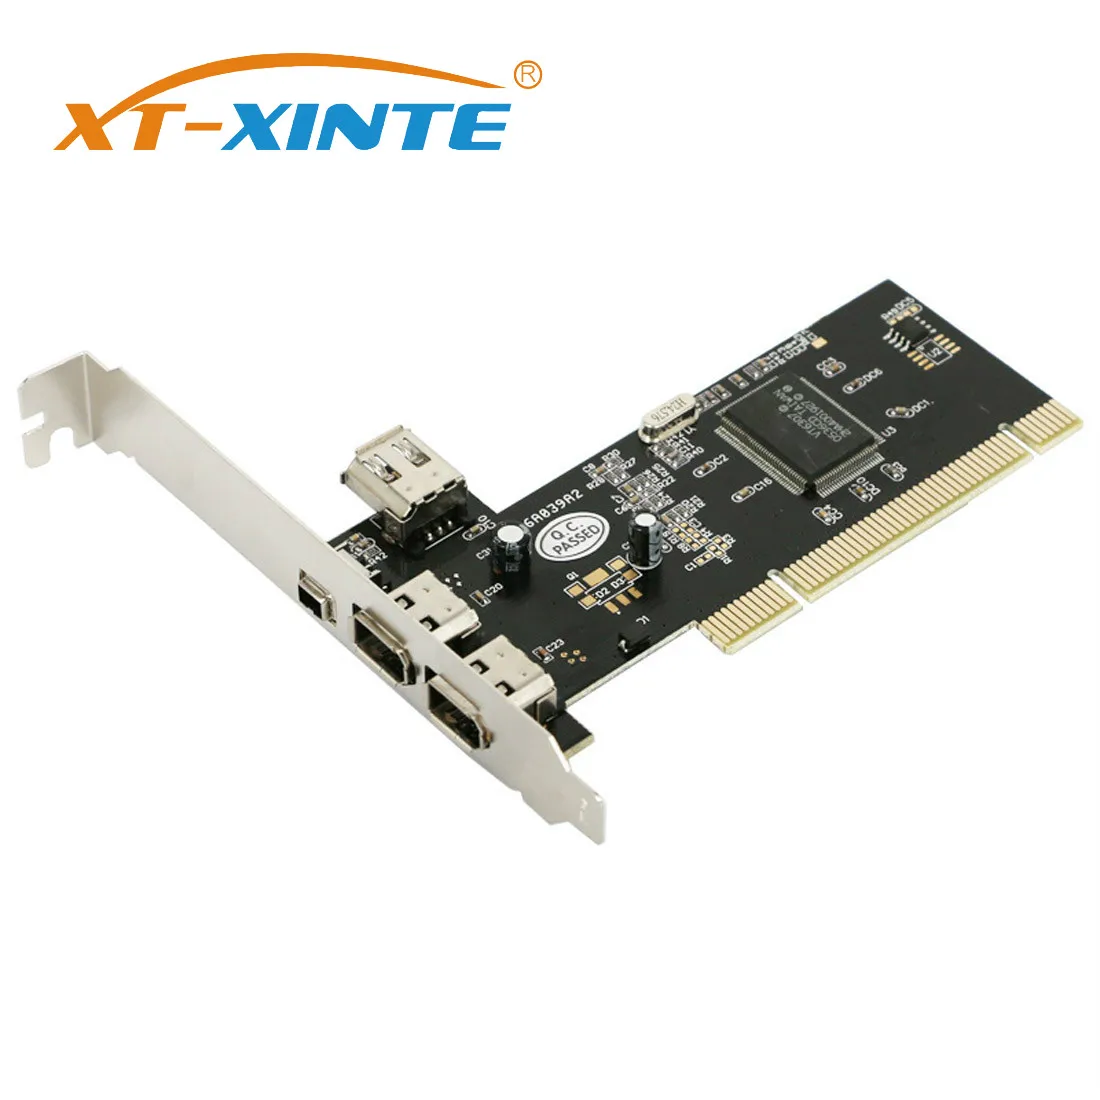 

XT-XINTE PCI 1394A video capture card 4 Ports (3+1) Controller Card Extension Adapter PCI 3x 6 Pin 1x 4 Pin with IEEE 1394 Cable